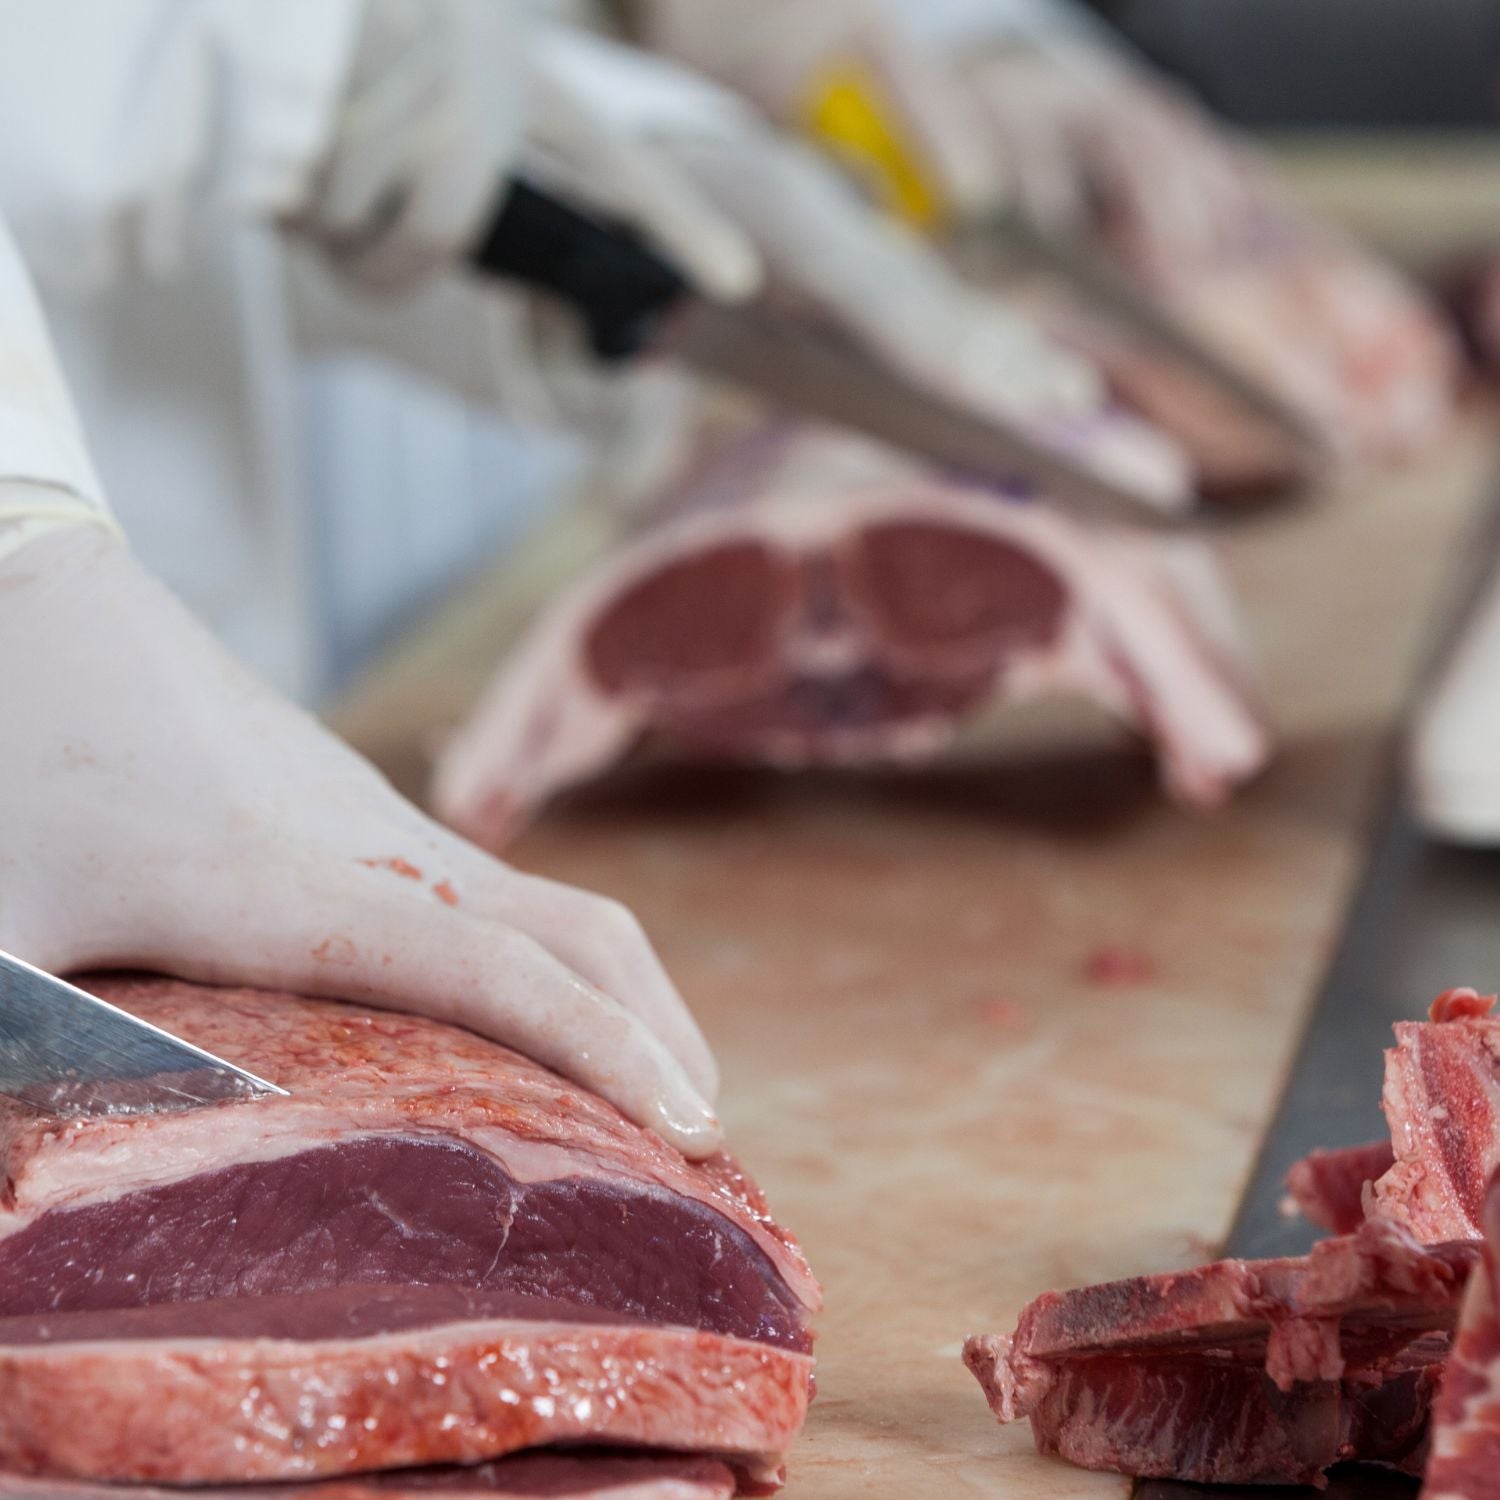 Meat Industry Meat Processing Behind the Scenes of Meat King An Insider's Look at Meat Processing